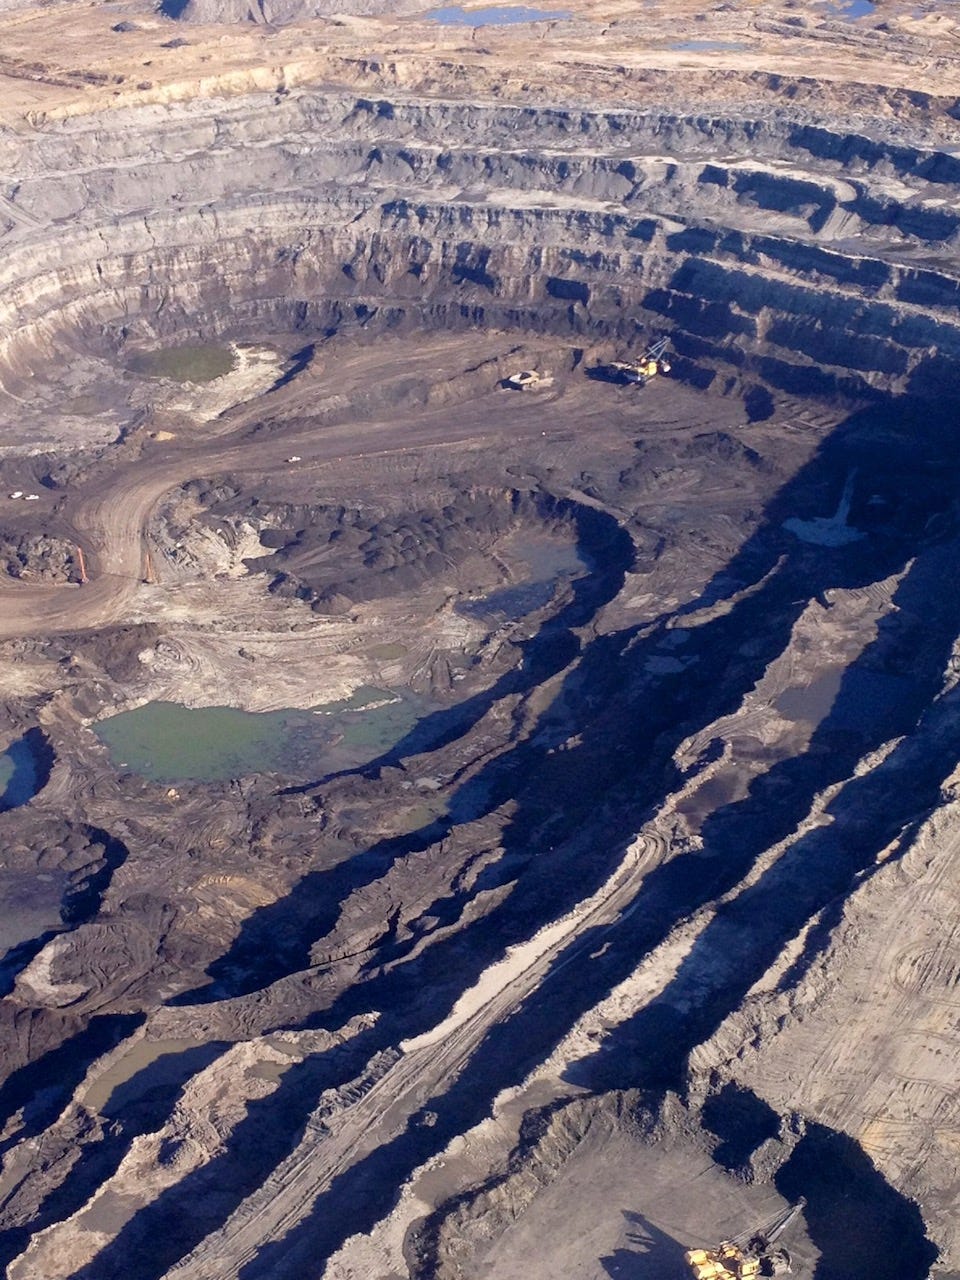 A large open-pin bitumen mine in northern Alberta, showing large industrial equipment as mere specks against the size of the pit.